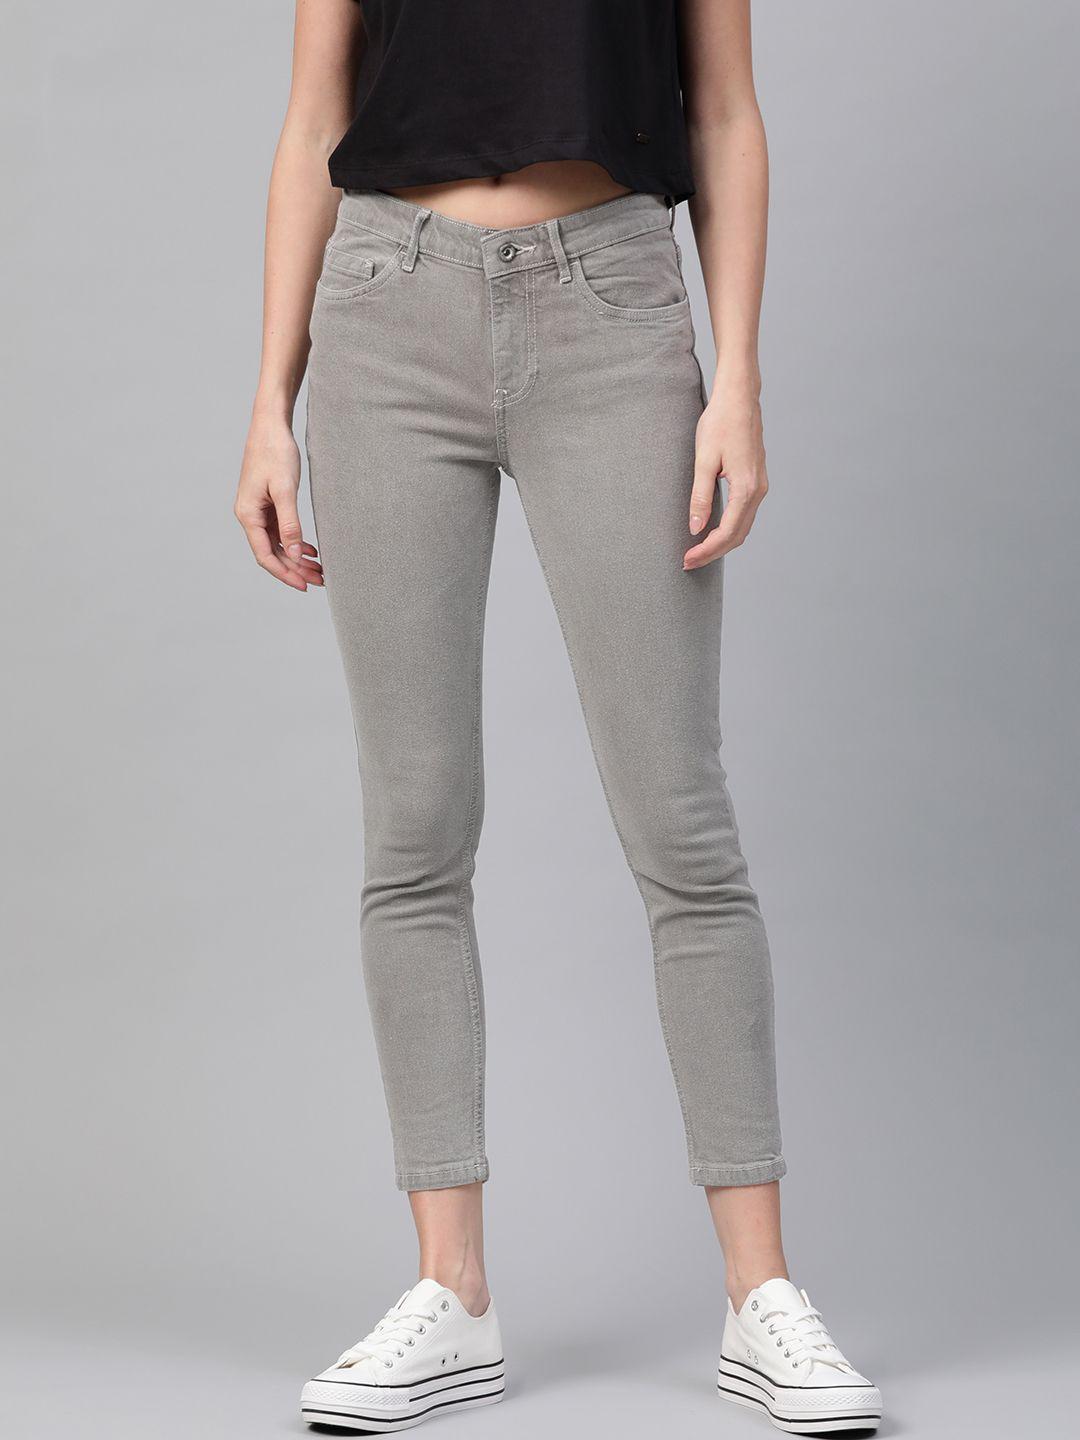 roadster-women-grey-skinny-fit-mid-rise-clean-look-cropped-stretchable-jeans